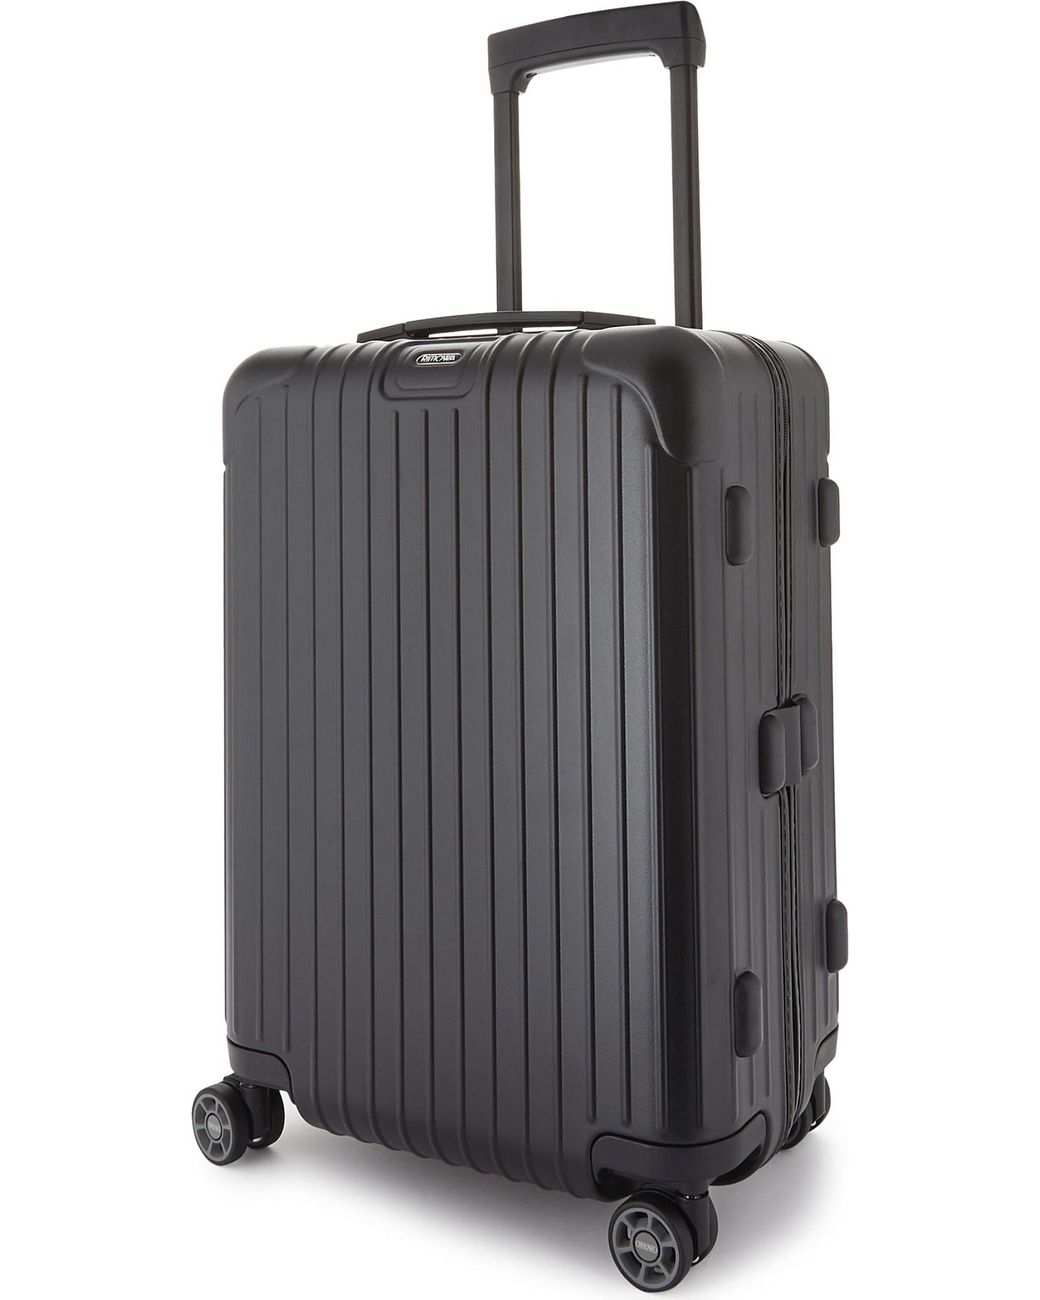 Looking for a Roller Bag? Try the Rimowa Salsa (Review) — sightDOING